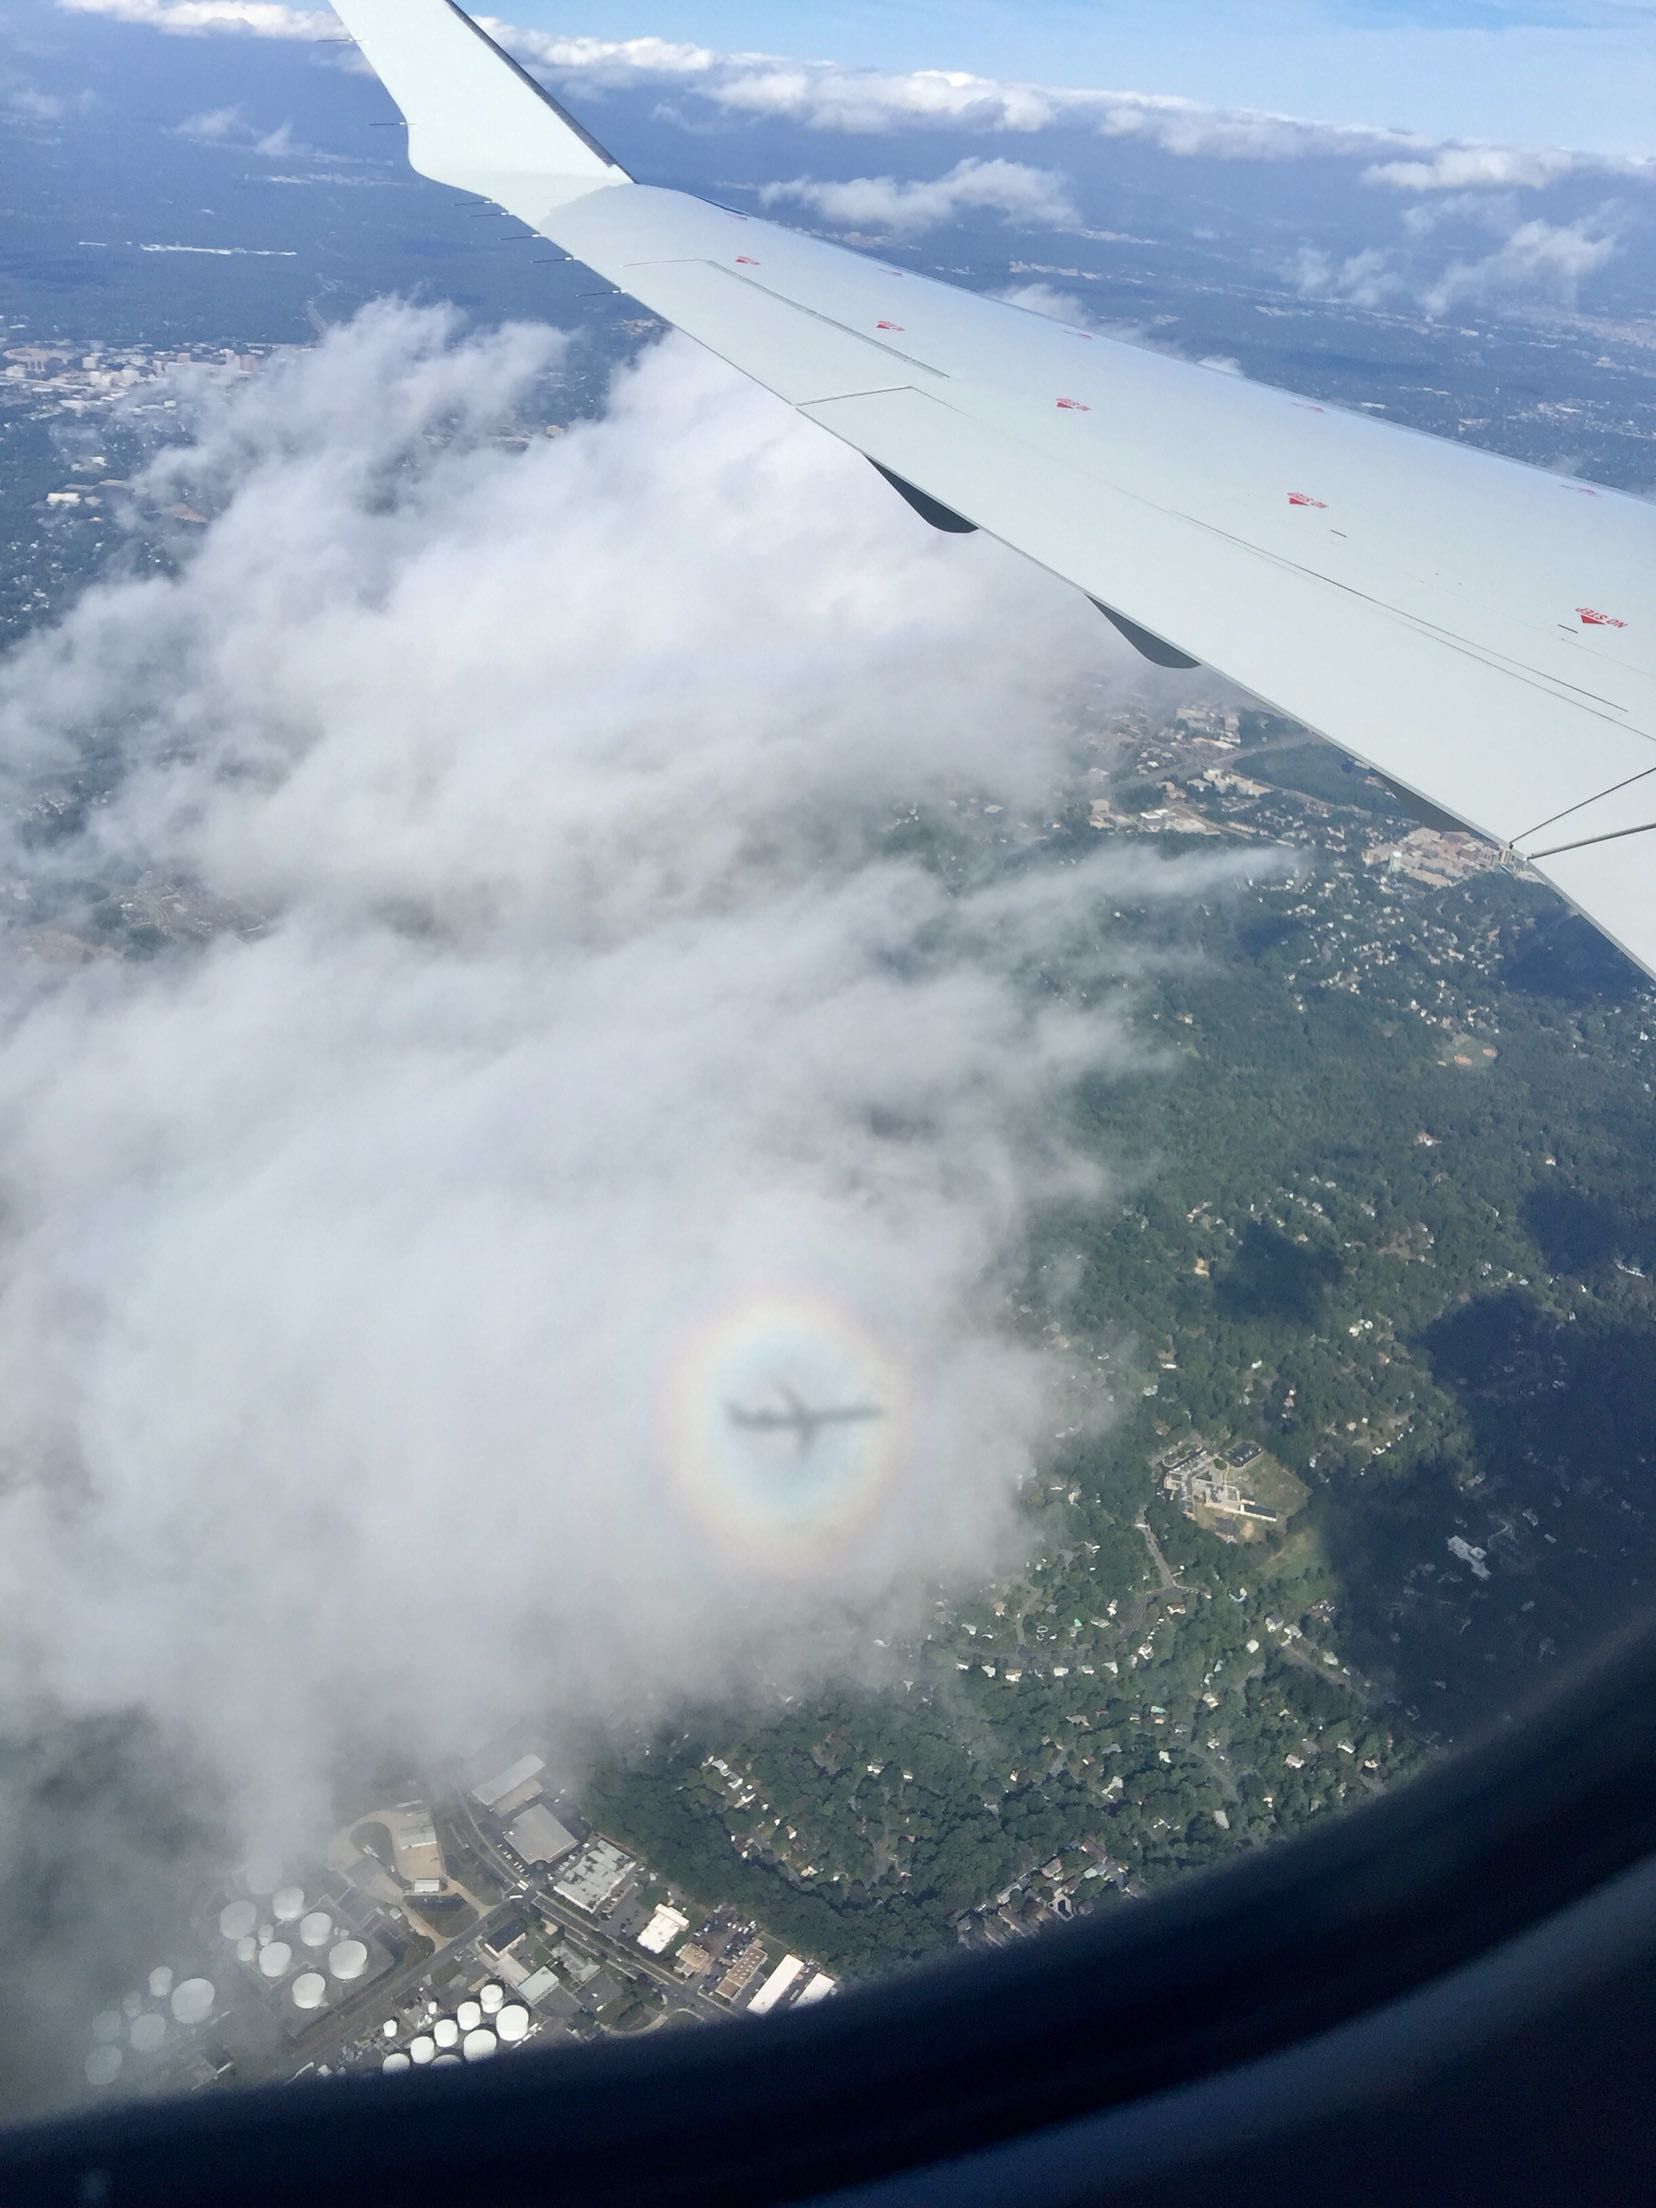 My plane's shadow on this cloud with a halo around it